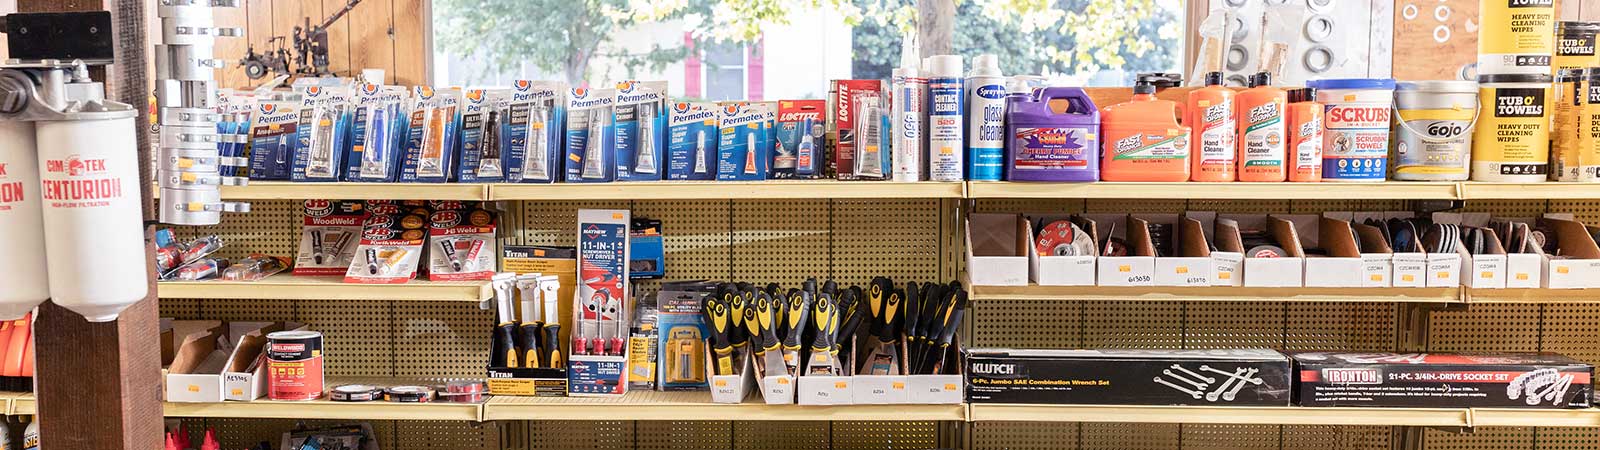 various items on shelves in the hardware store